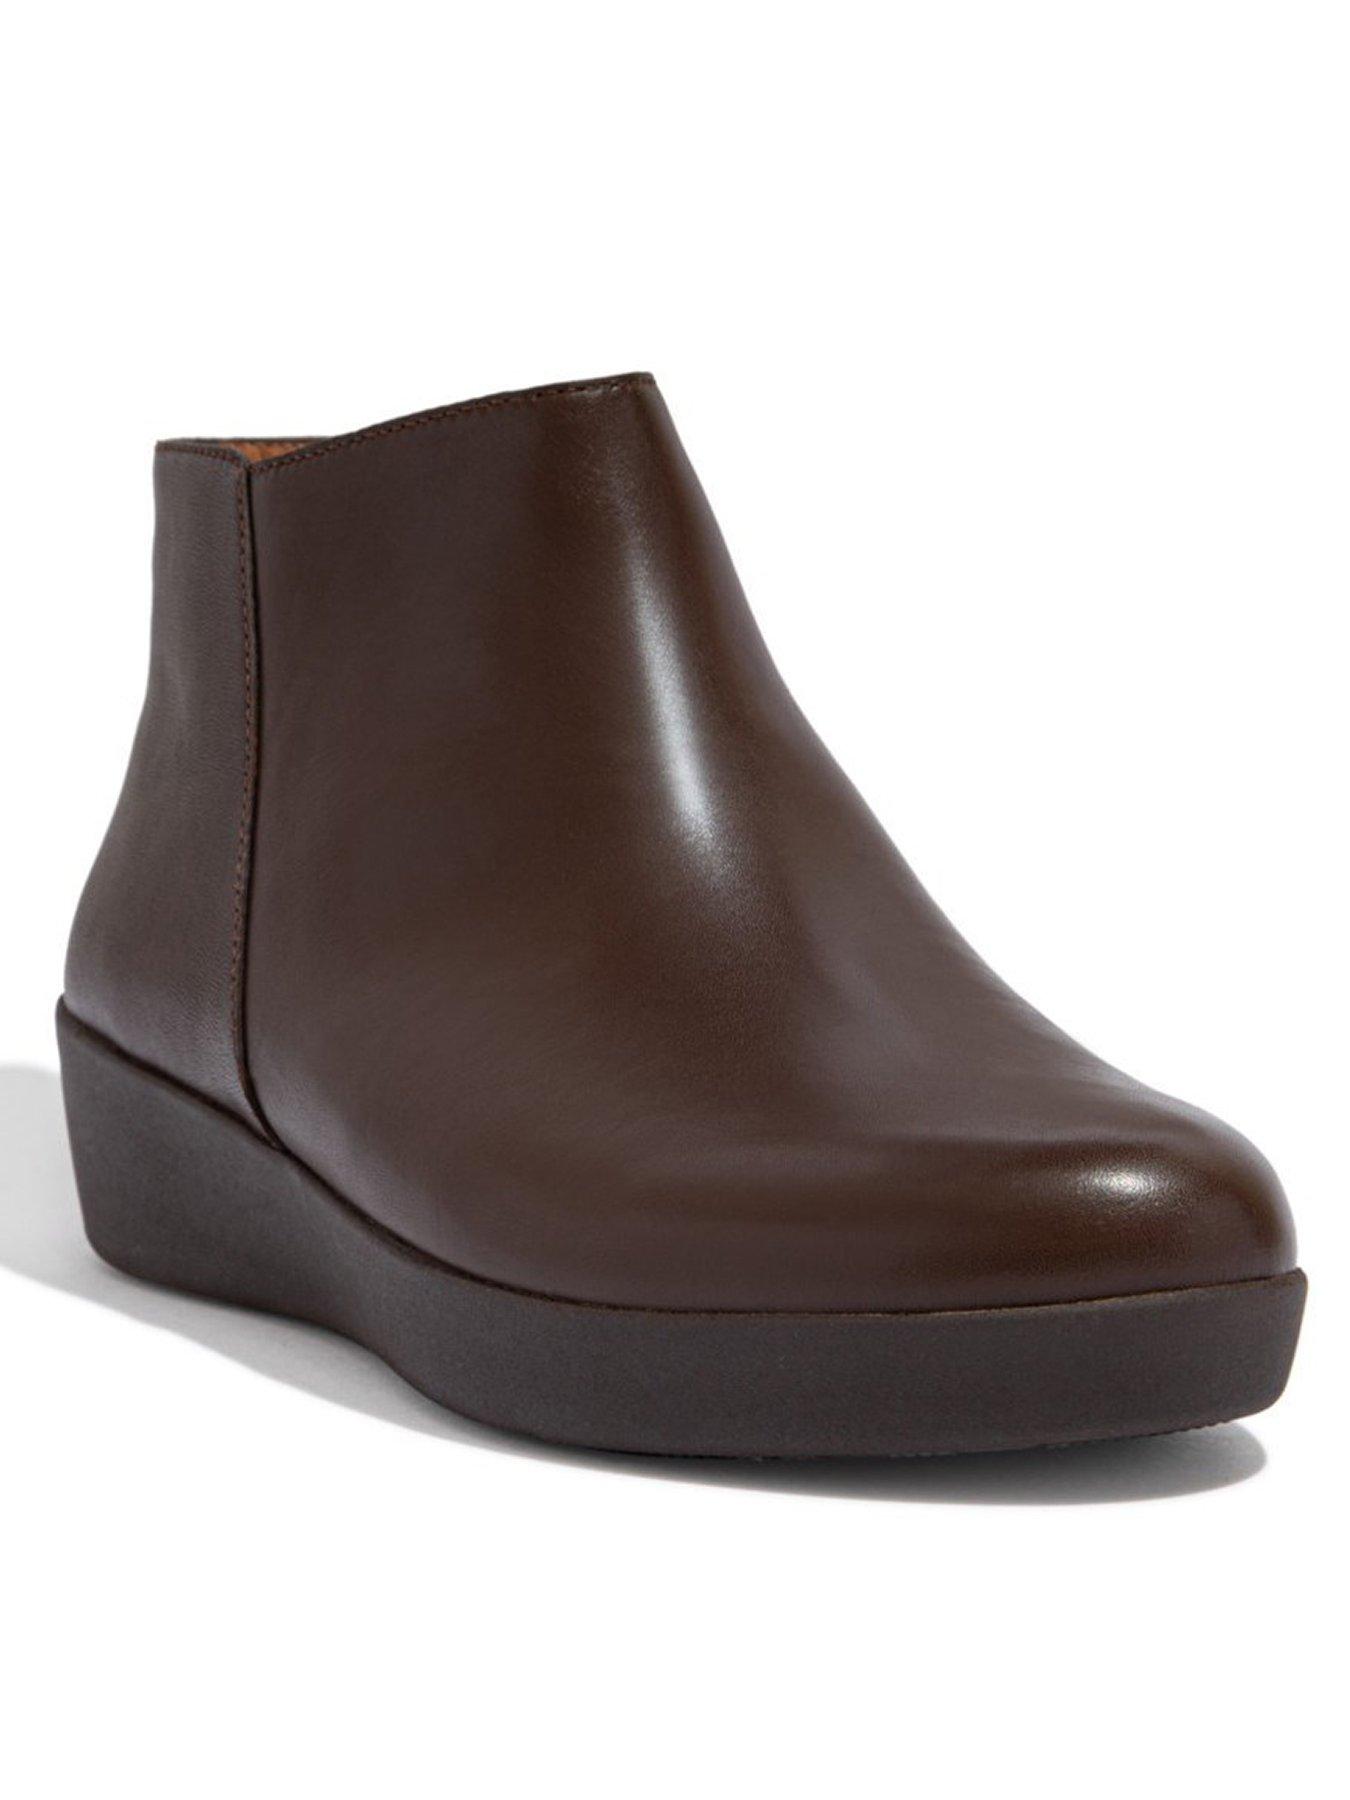 Shoes & boots Sumi Chelsea Boots - Brown